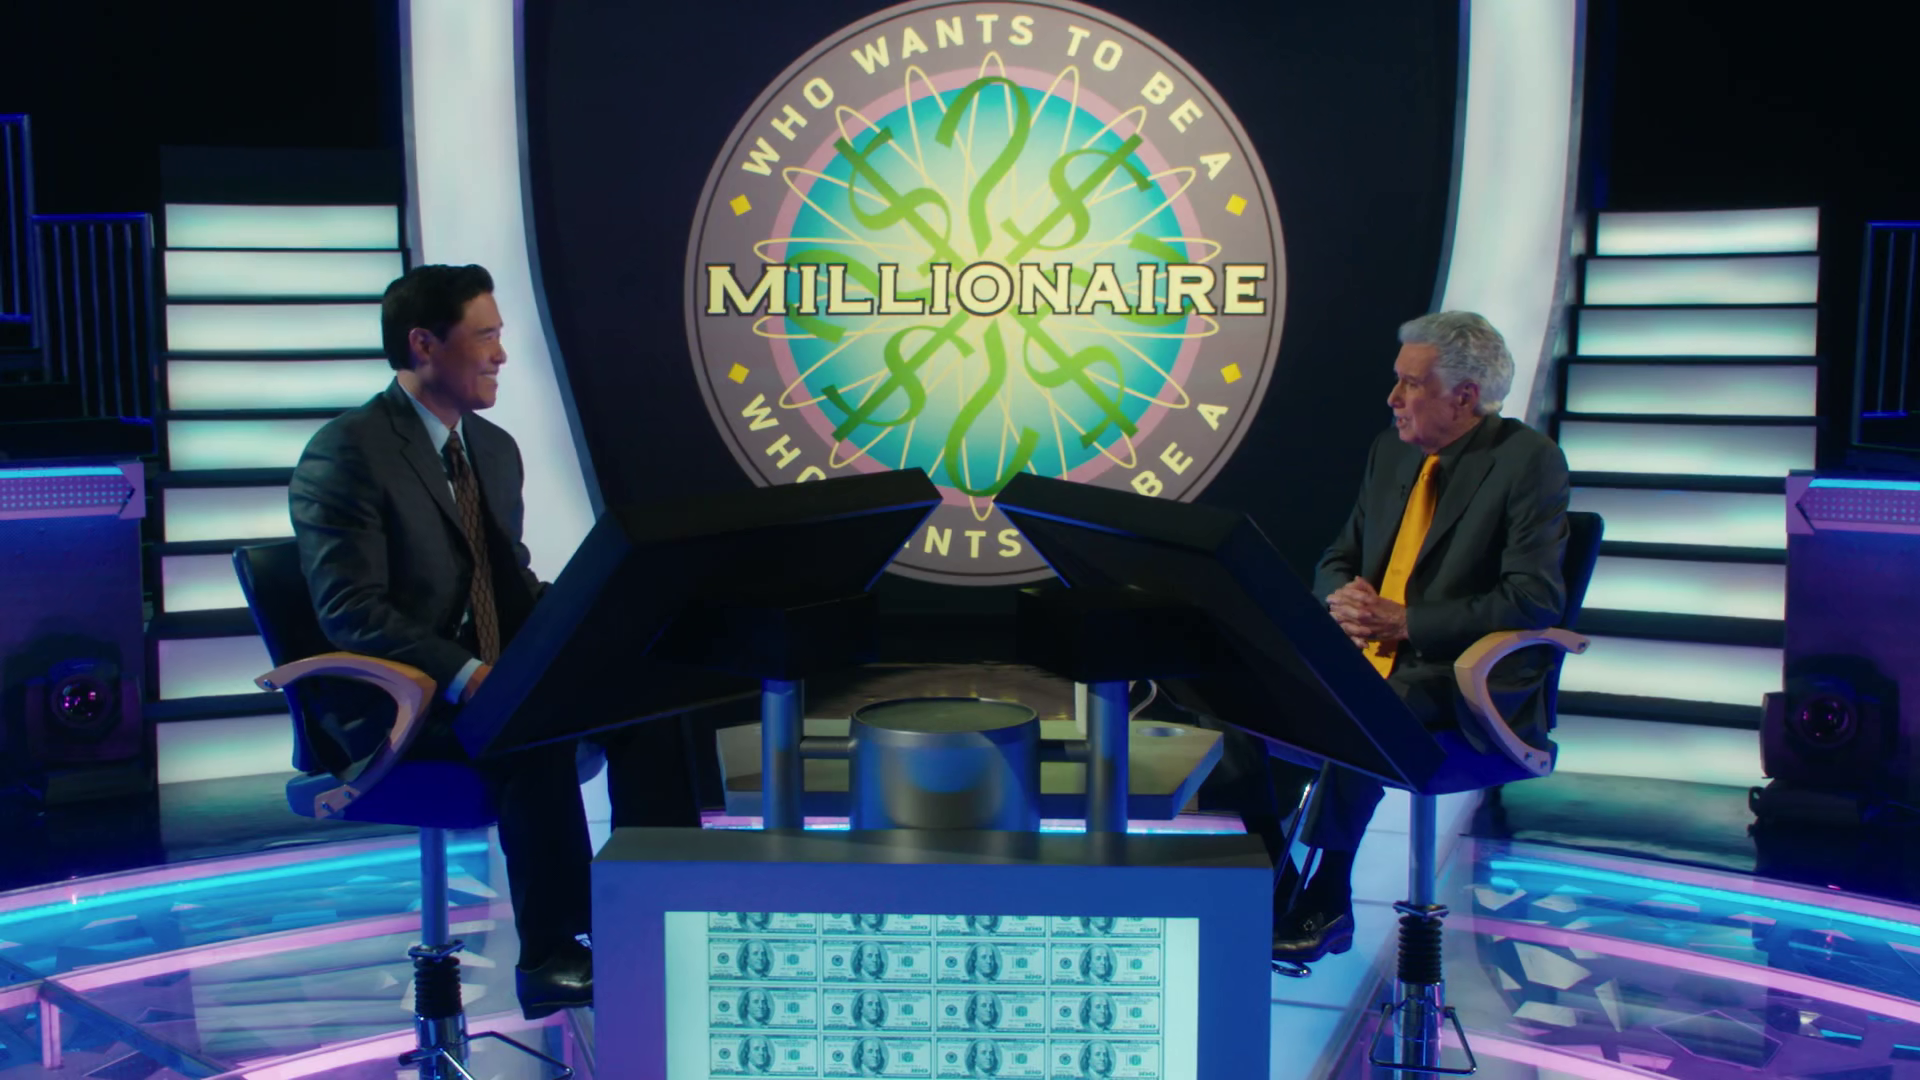 who wants to be a millionaire regis questions